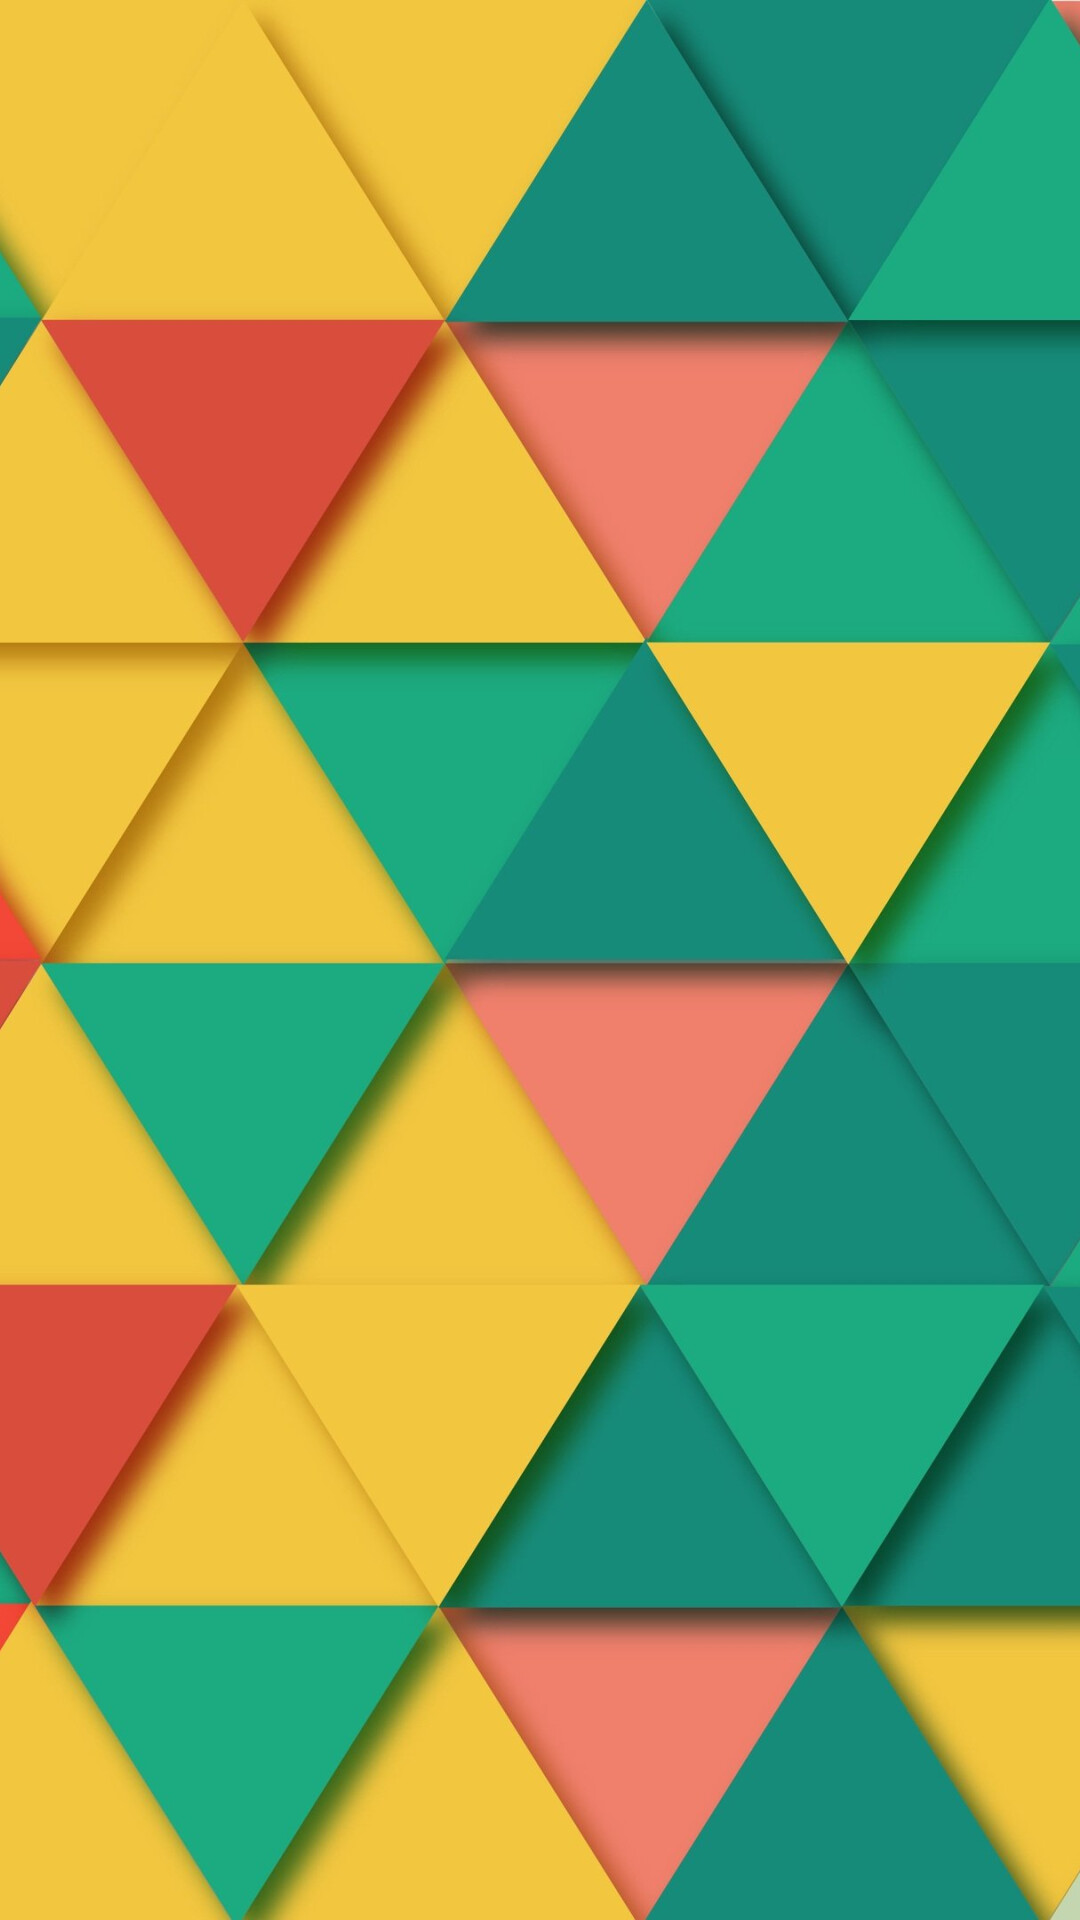 Geometric Abstract: Parallelograms, Acute angles, Equilateral triangles. 1080x1920 Full HD Wallpaper.